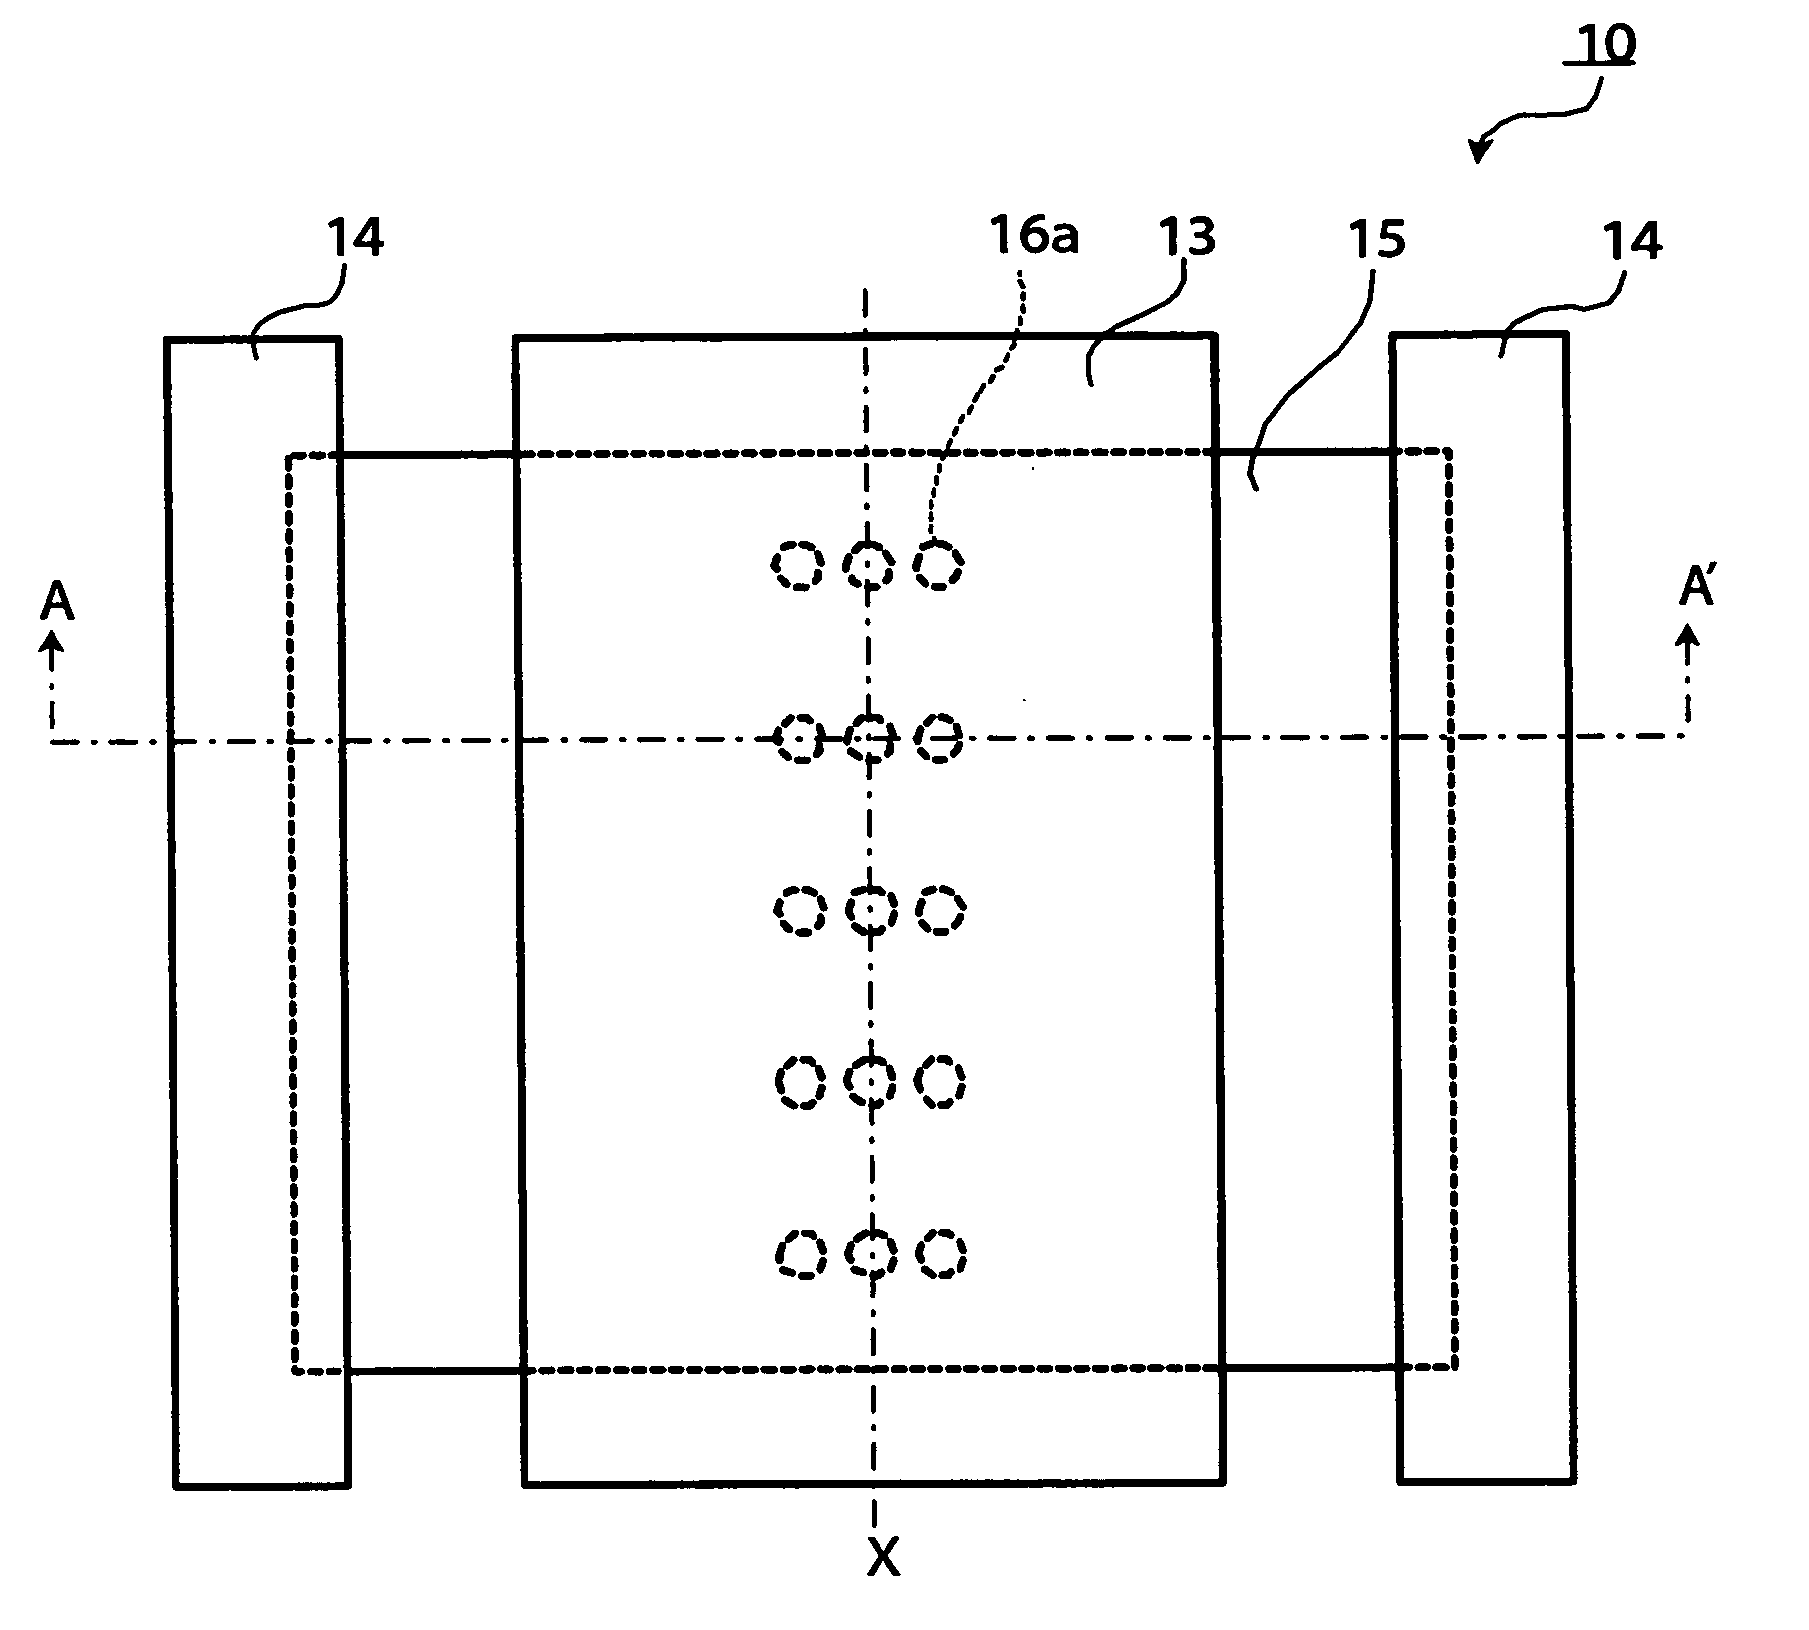 Thermoelectric element